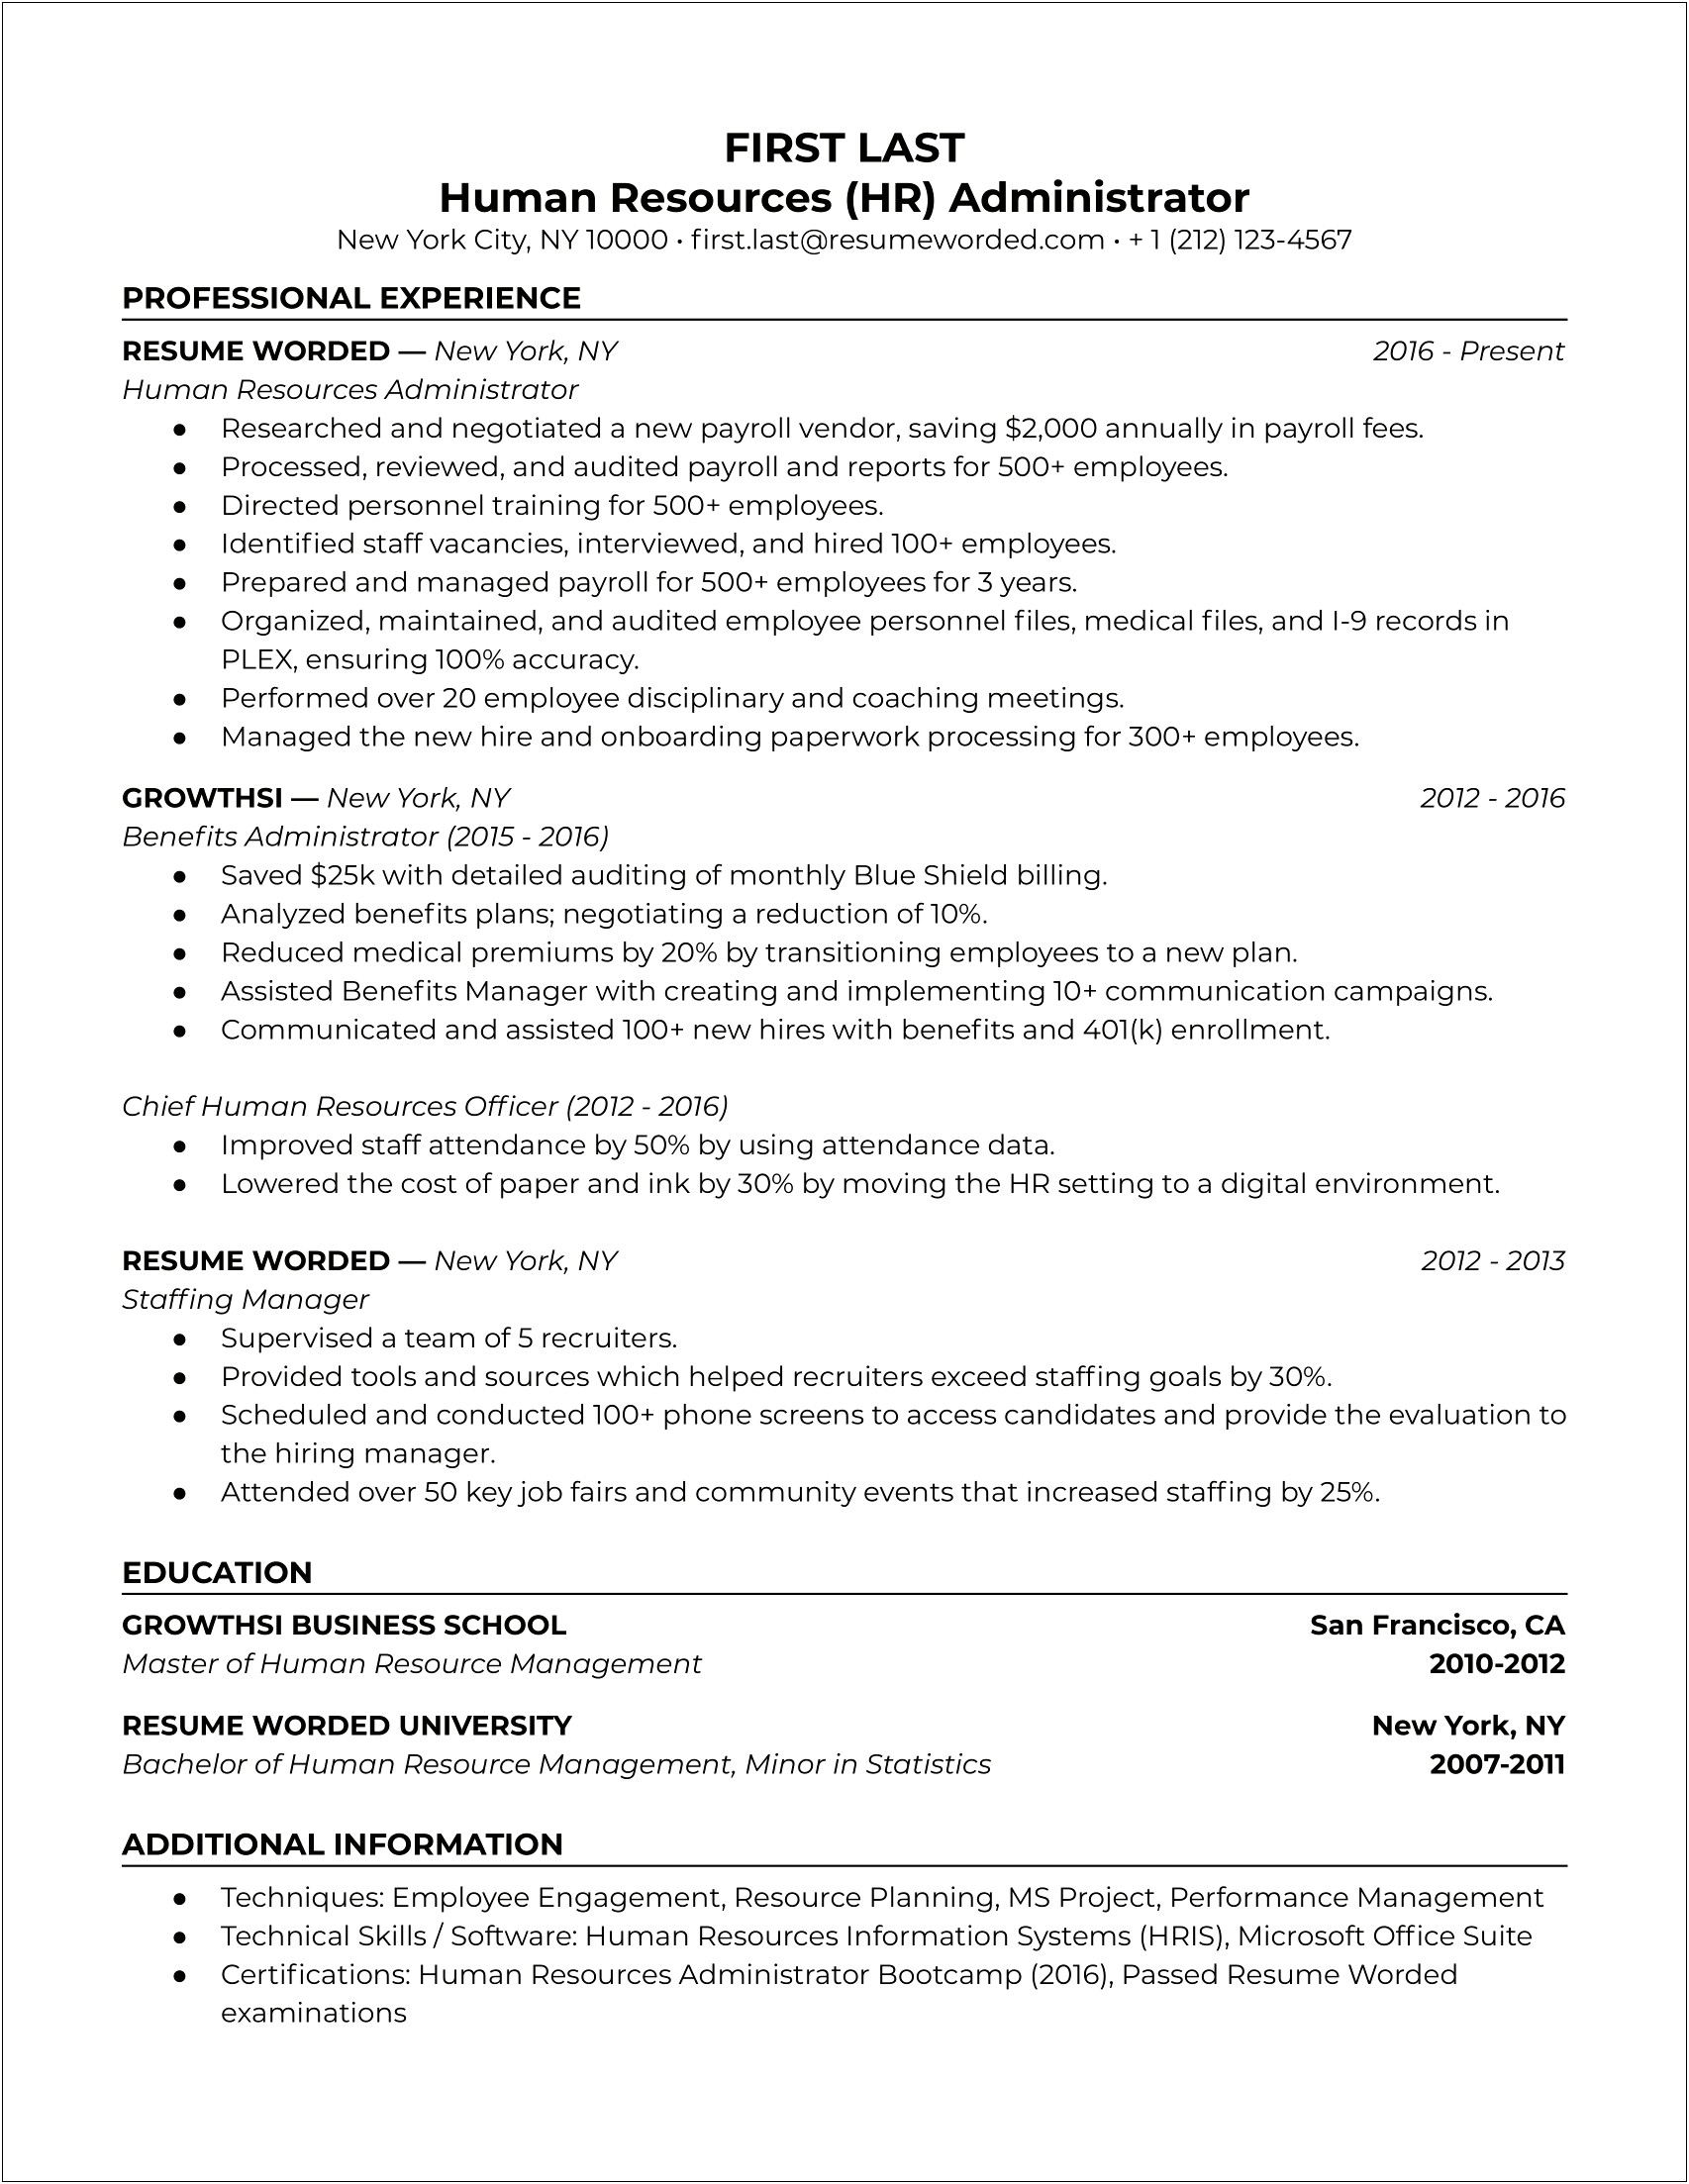 Skills For Human Resources Assistant Resume